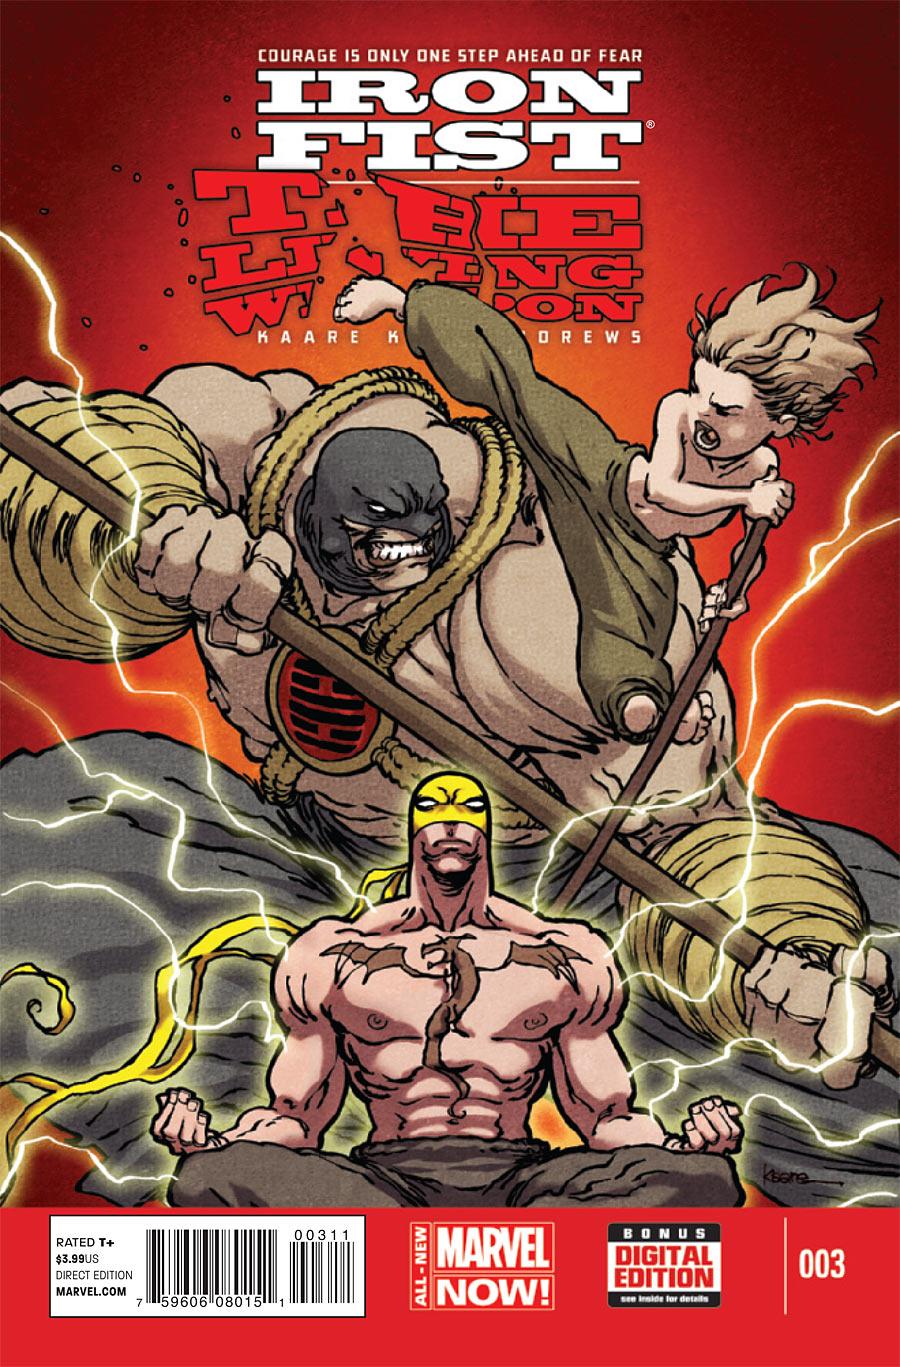 Iron Fist: The Living Weapon Vol. 1 #3